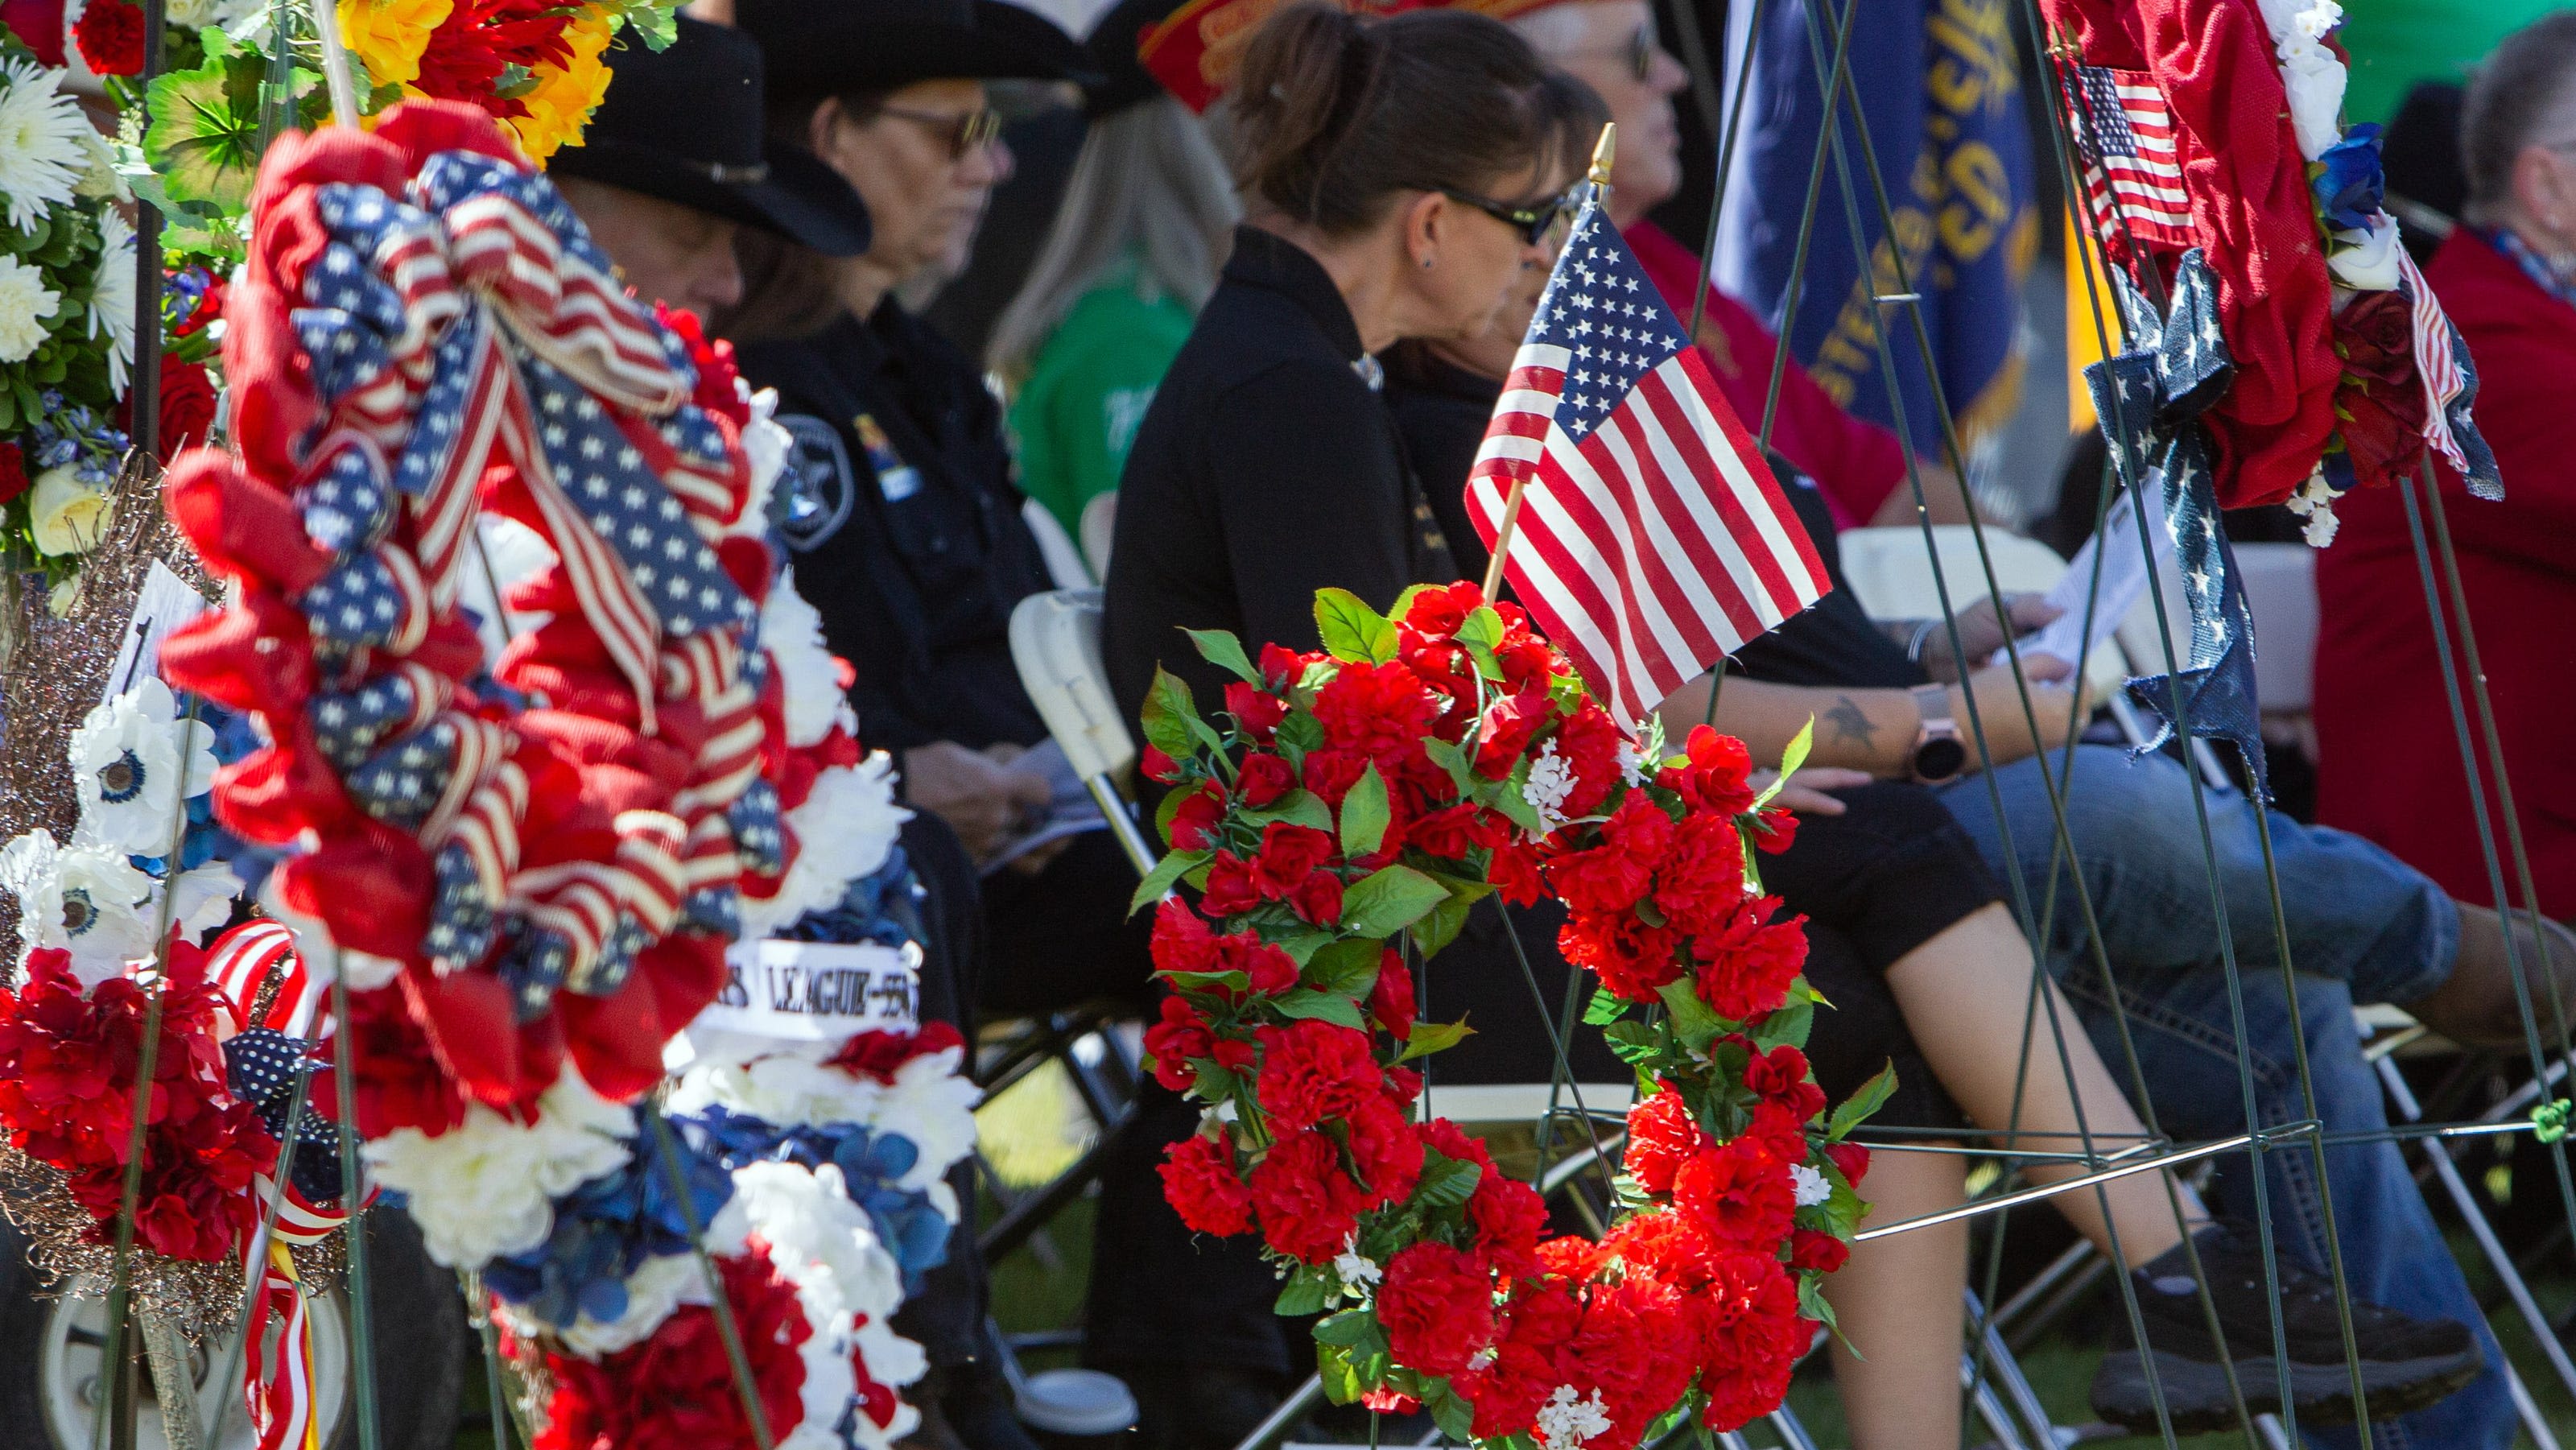 “Home of the Brave” ceremony at the VA National Memorial Cemetery of Arizona